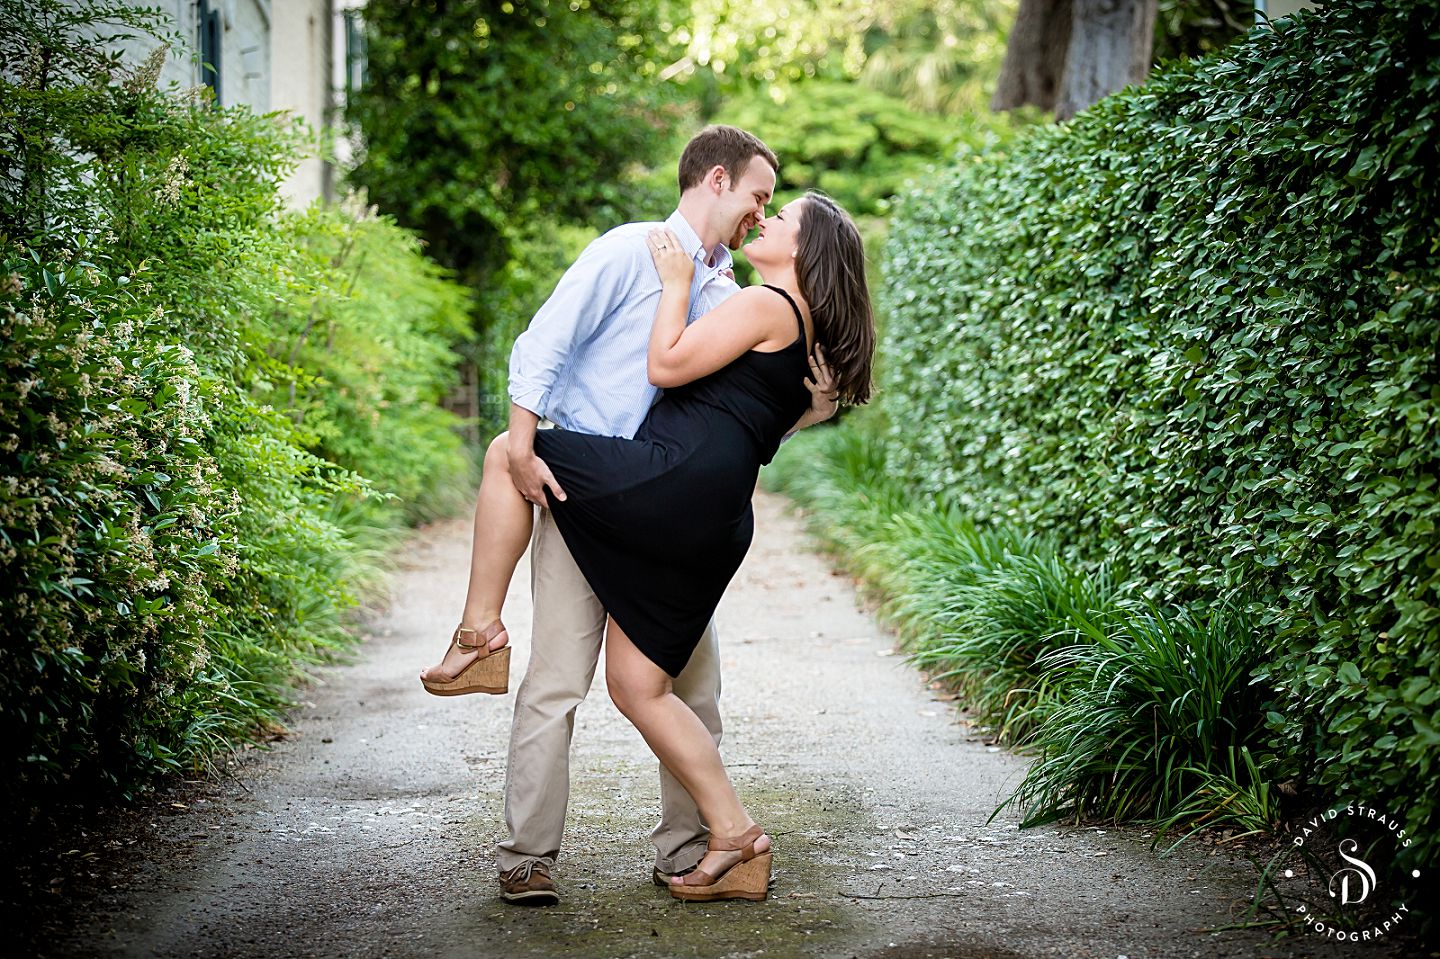 Charleston Engagement Pictures - Wedding Photographer - David Strauss -Chelsea and Justin -6